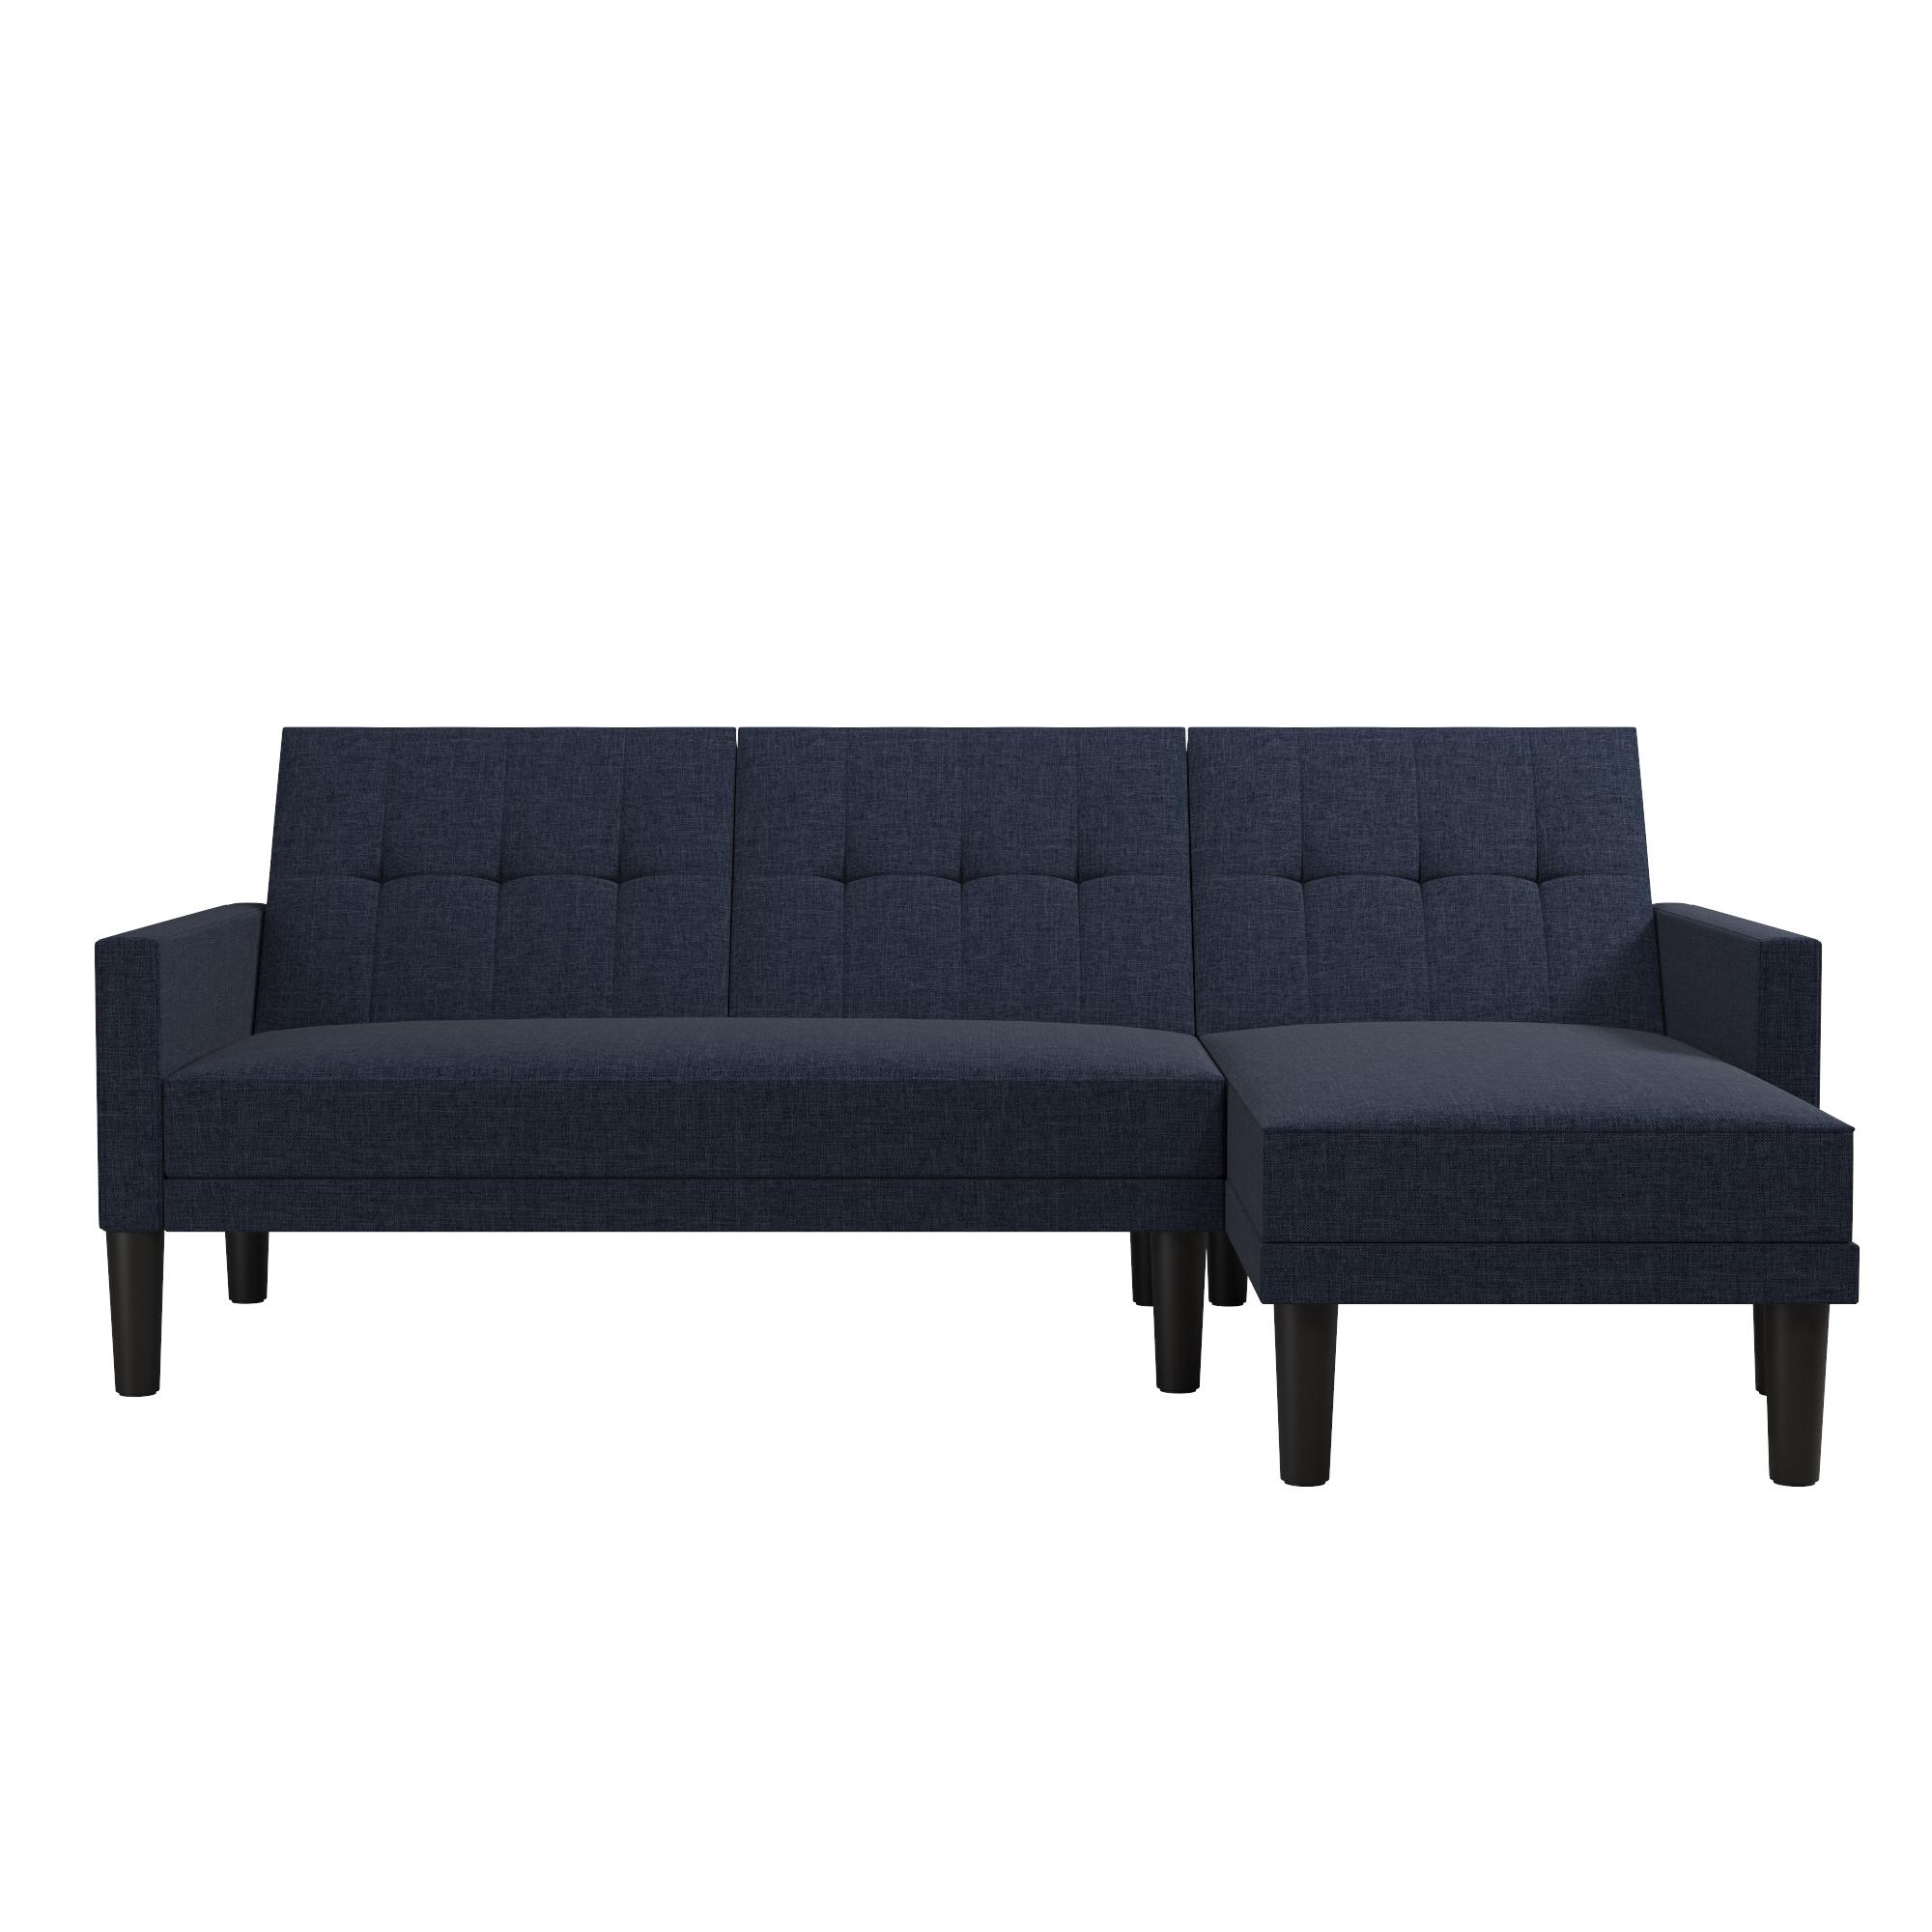 DHP Hudson Small Space Sectional Sofa Futon, Blue Linen - image 5 of 19